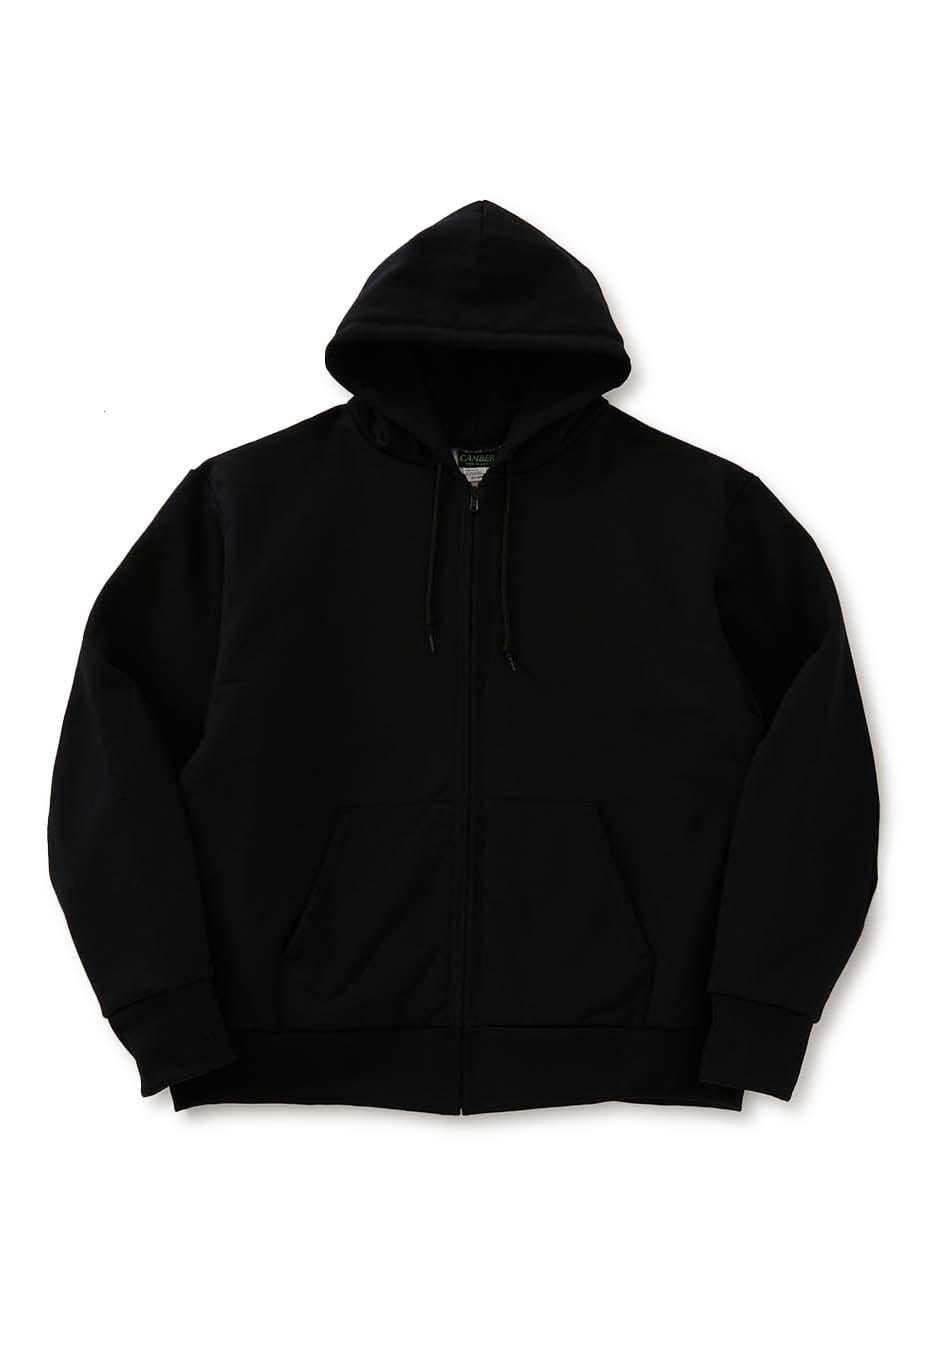 Camber x Toll free  Zip Parka